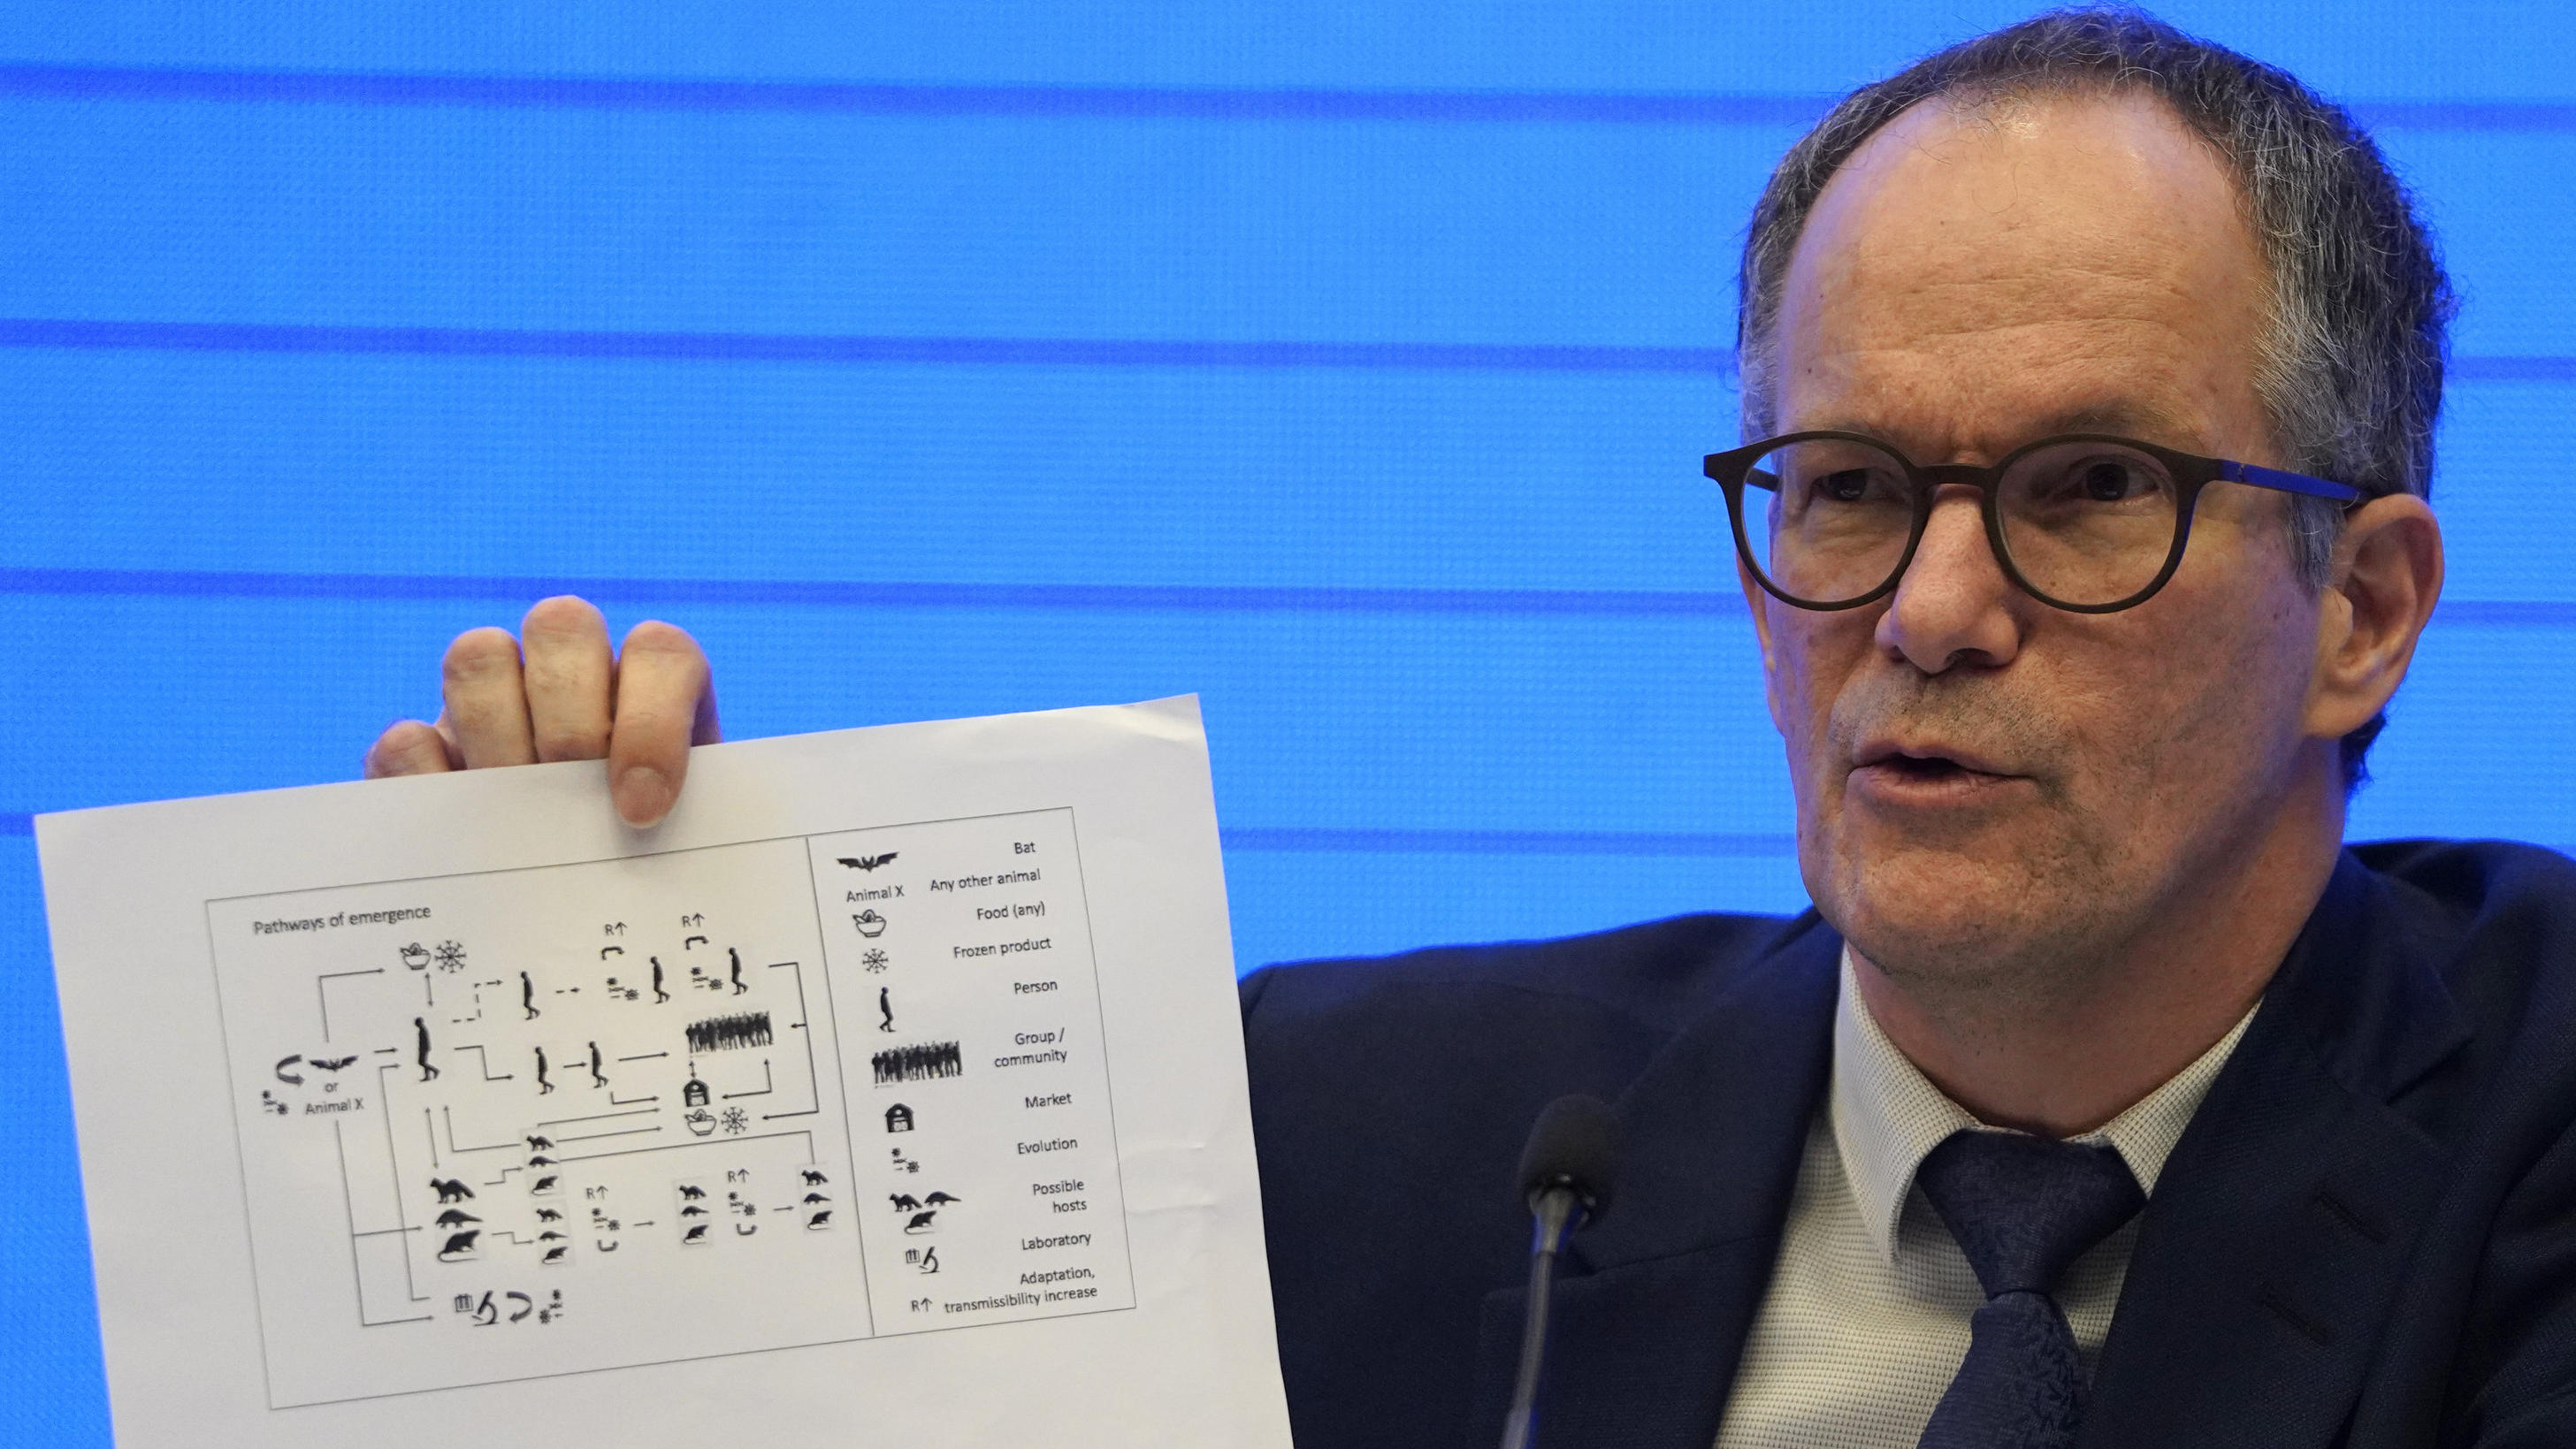 Peter Ben Embarek, of the World Health Organization team holds up a chart showing pathways of transmission of the virus during a joint press conference held at the end of the WHO mission in Wuhan in central China's Hubei province on Tuesday, Feb. 9, 